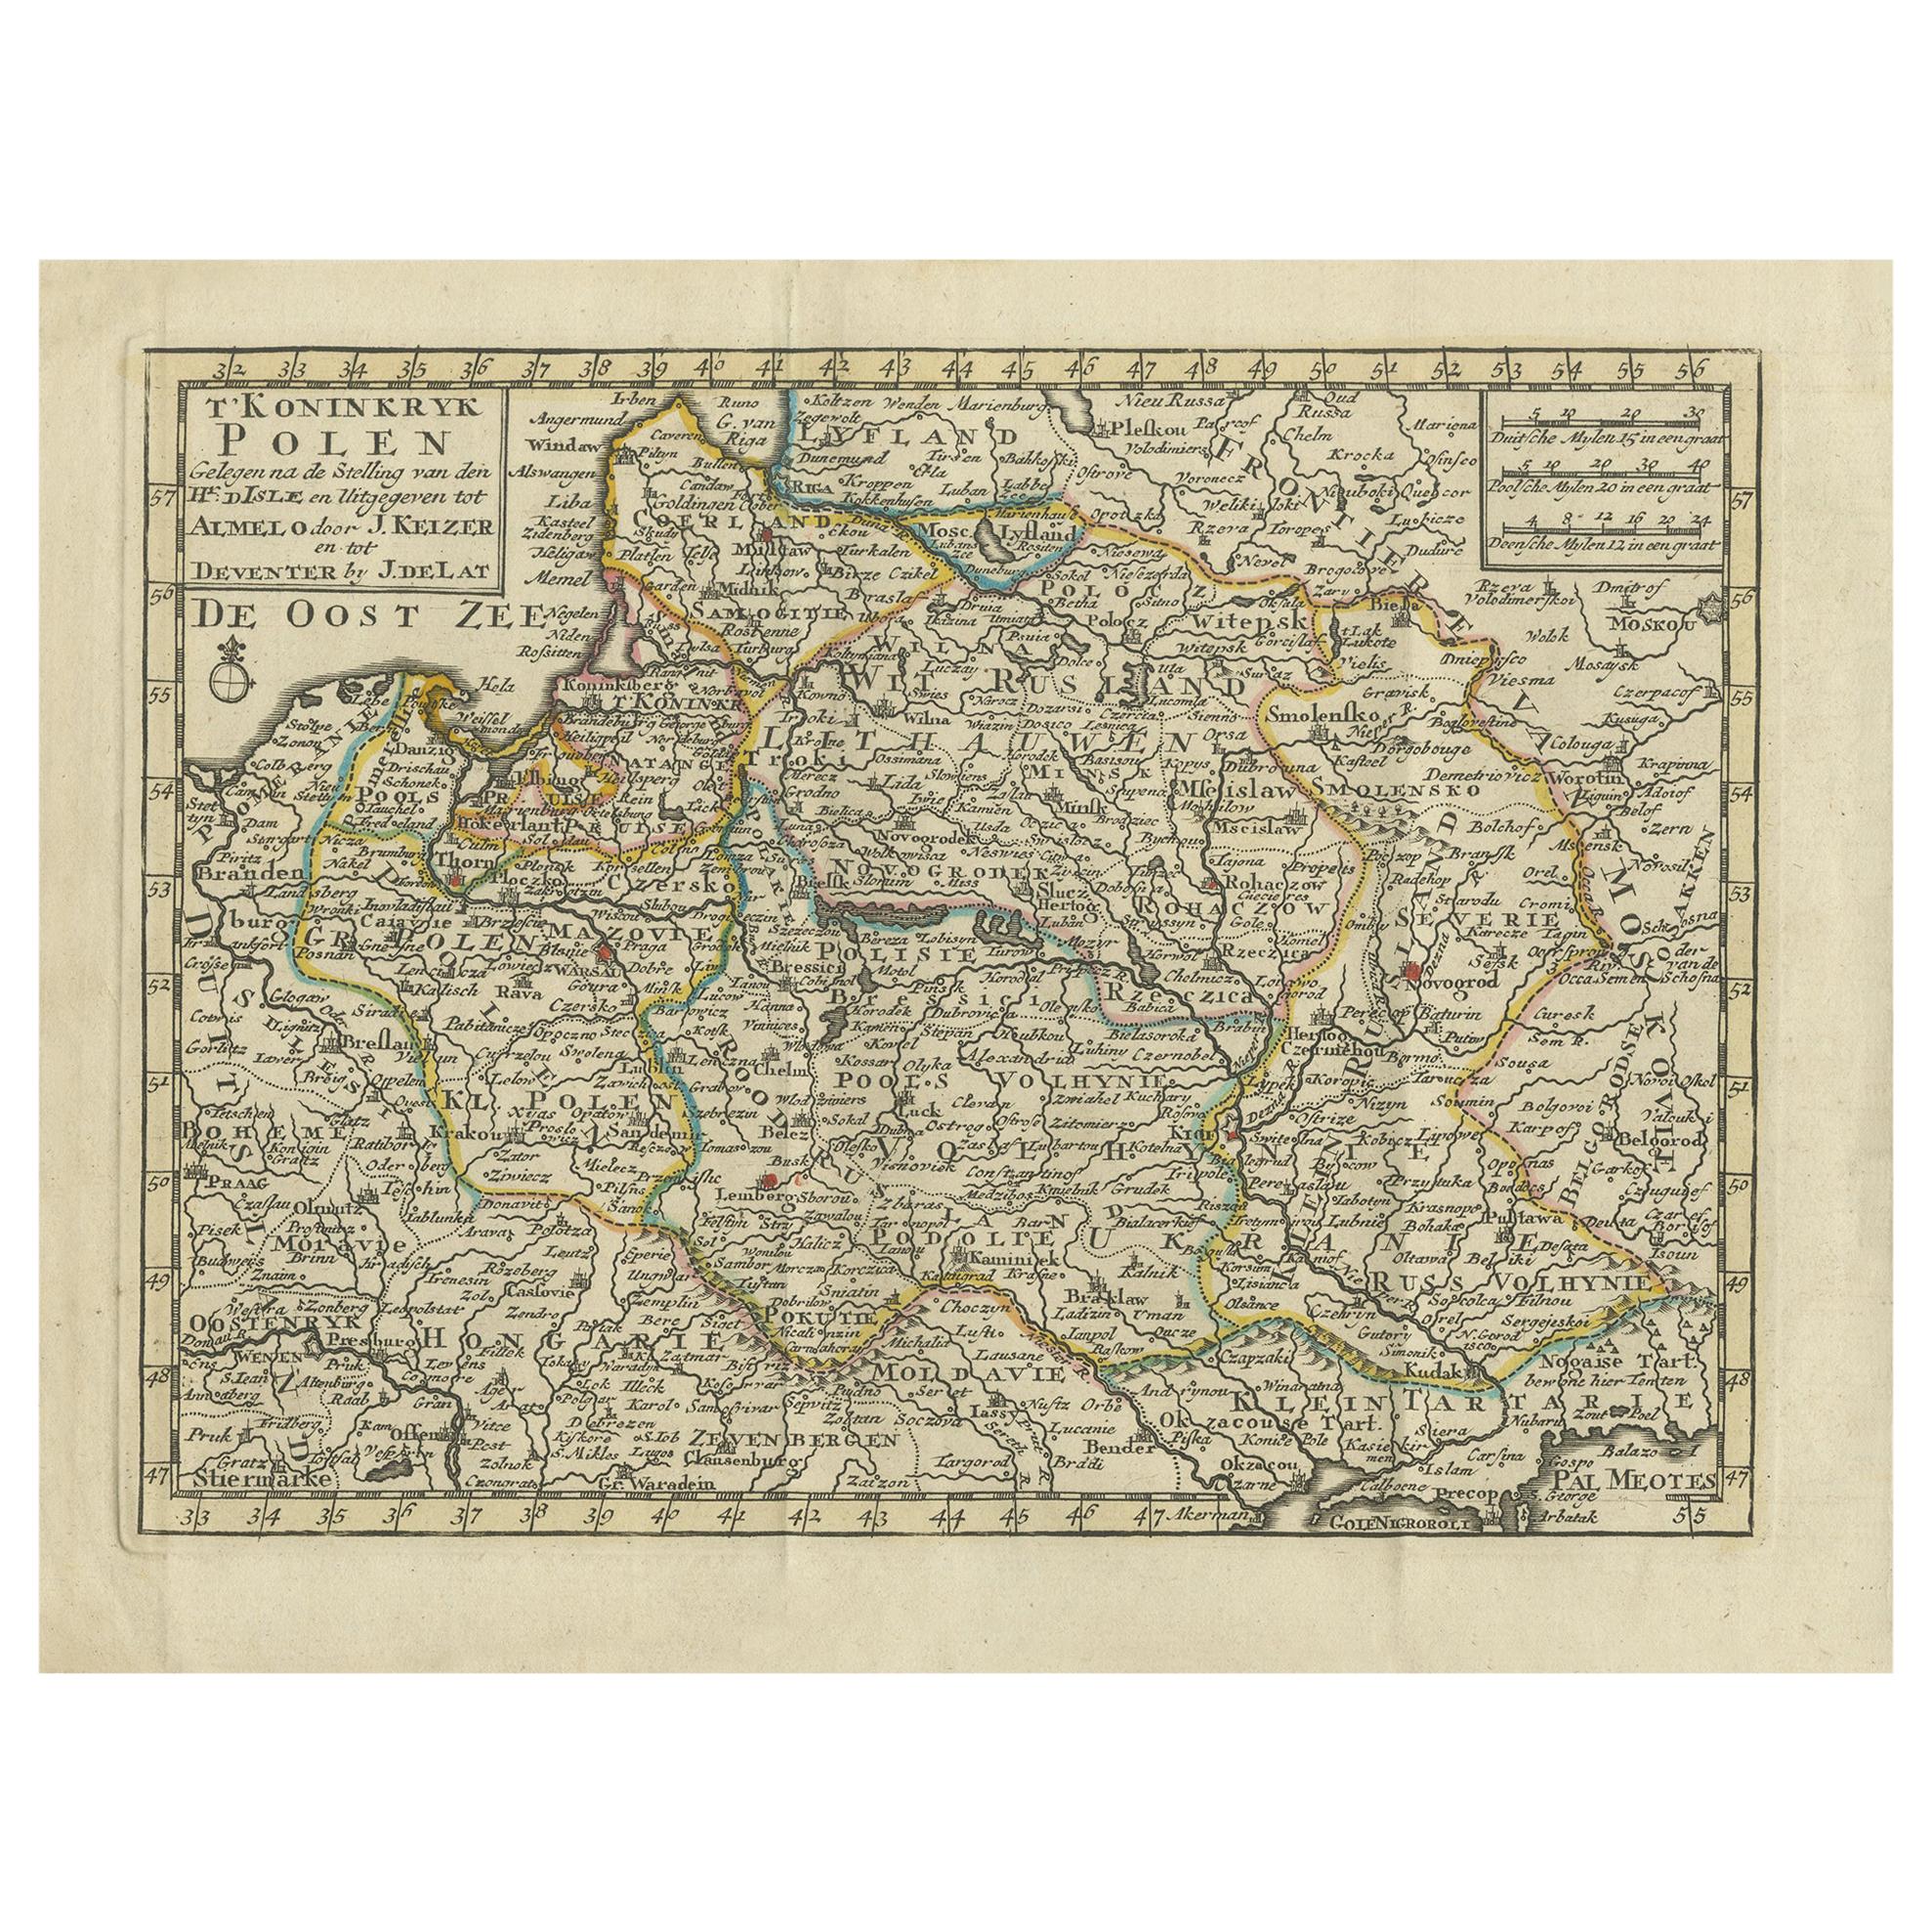 Antique Map of the Kingdom of Poland by Keizer & de Lat, 1788